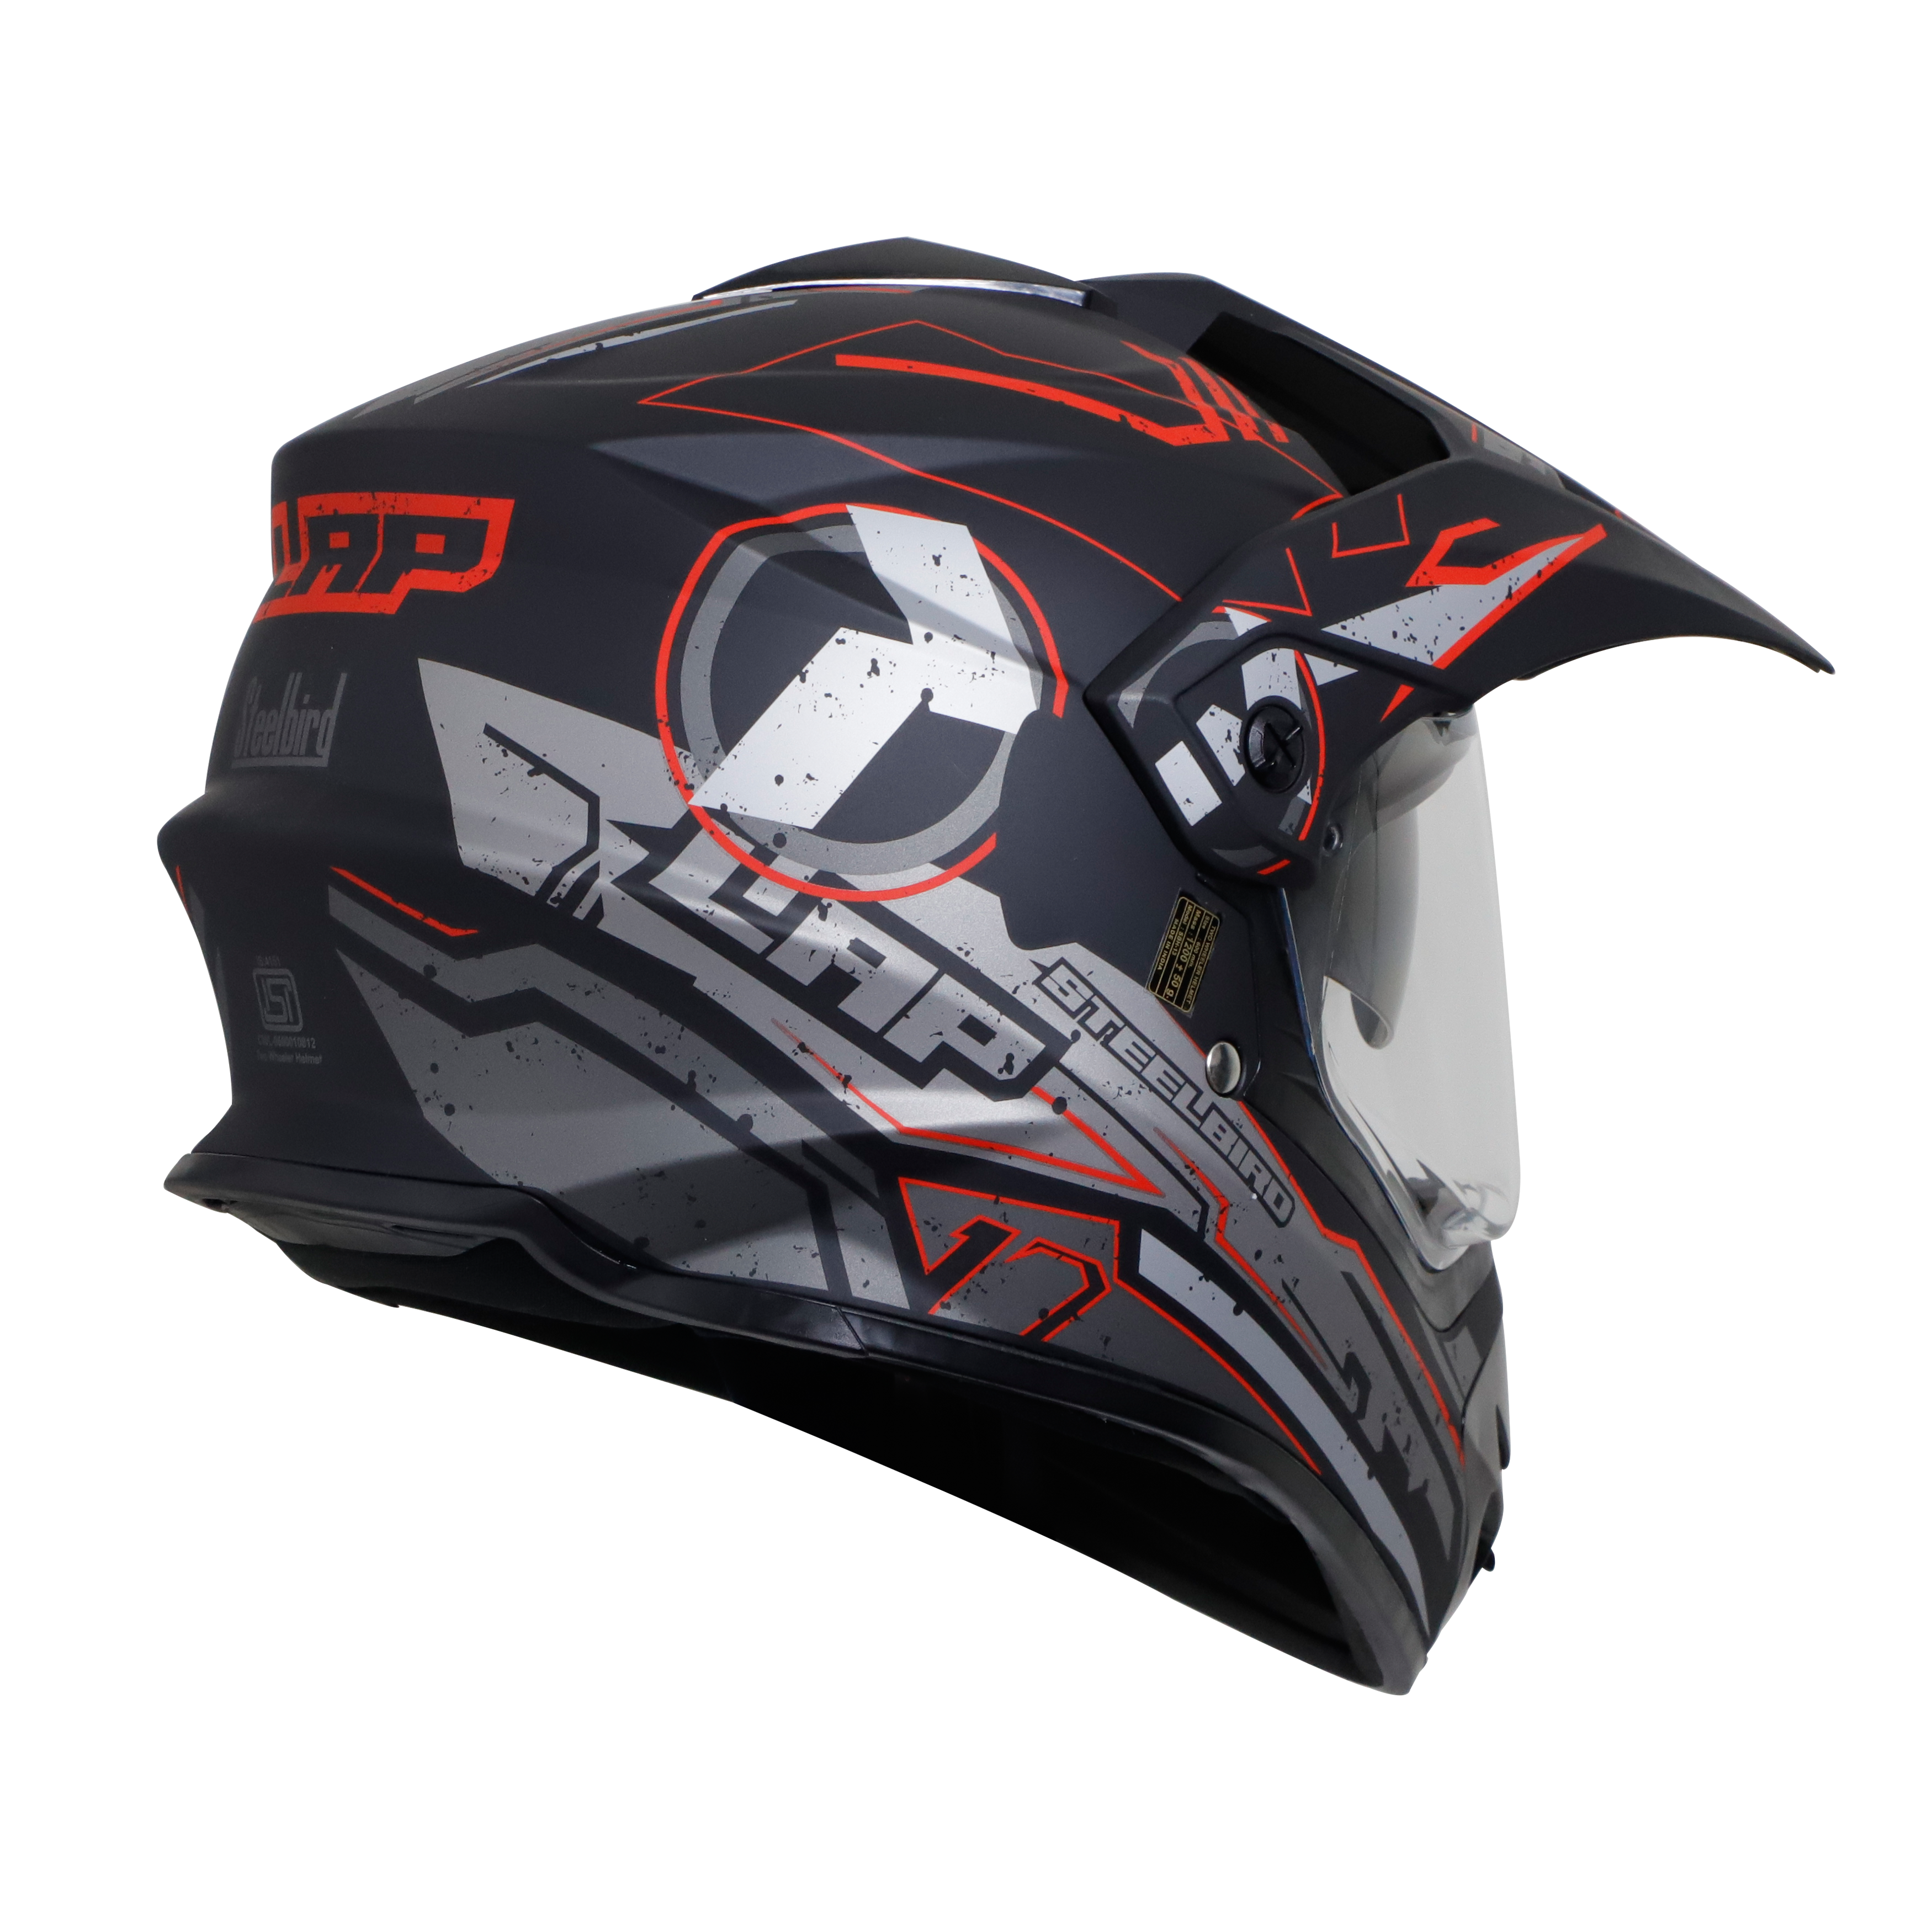 SB-42 BANG LAP GLOSSY BLACK WITH RED (WITH CHROME SILVER INNER SUN SHIELD)